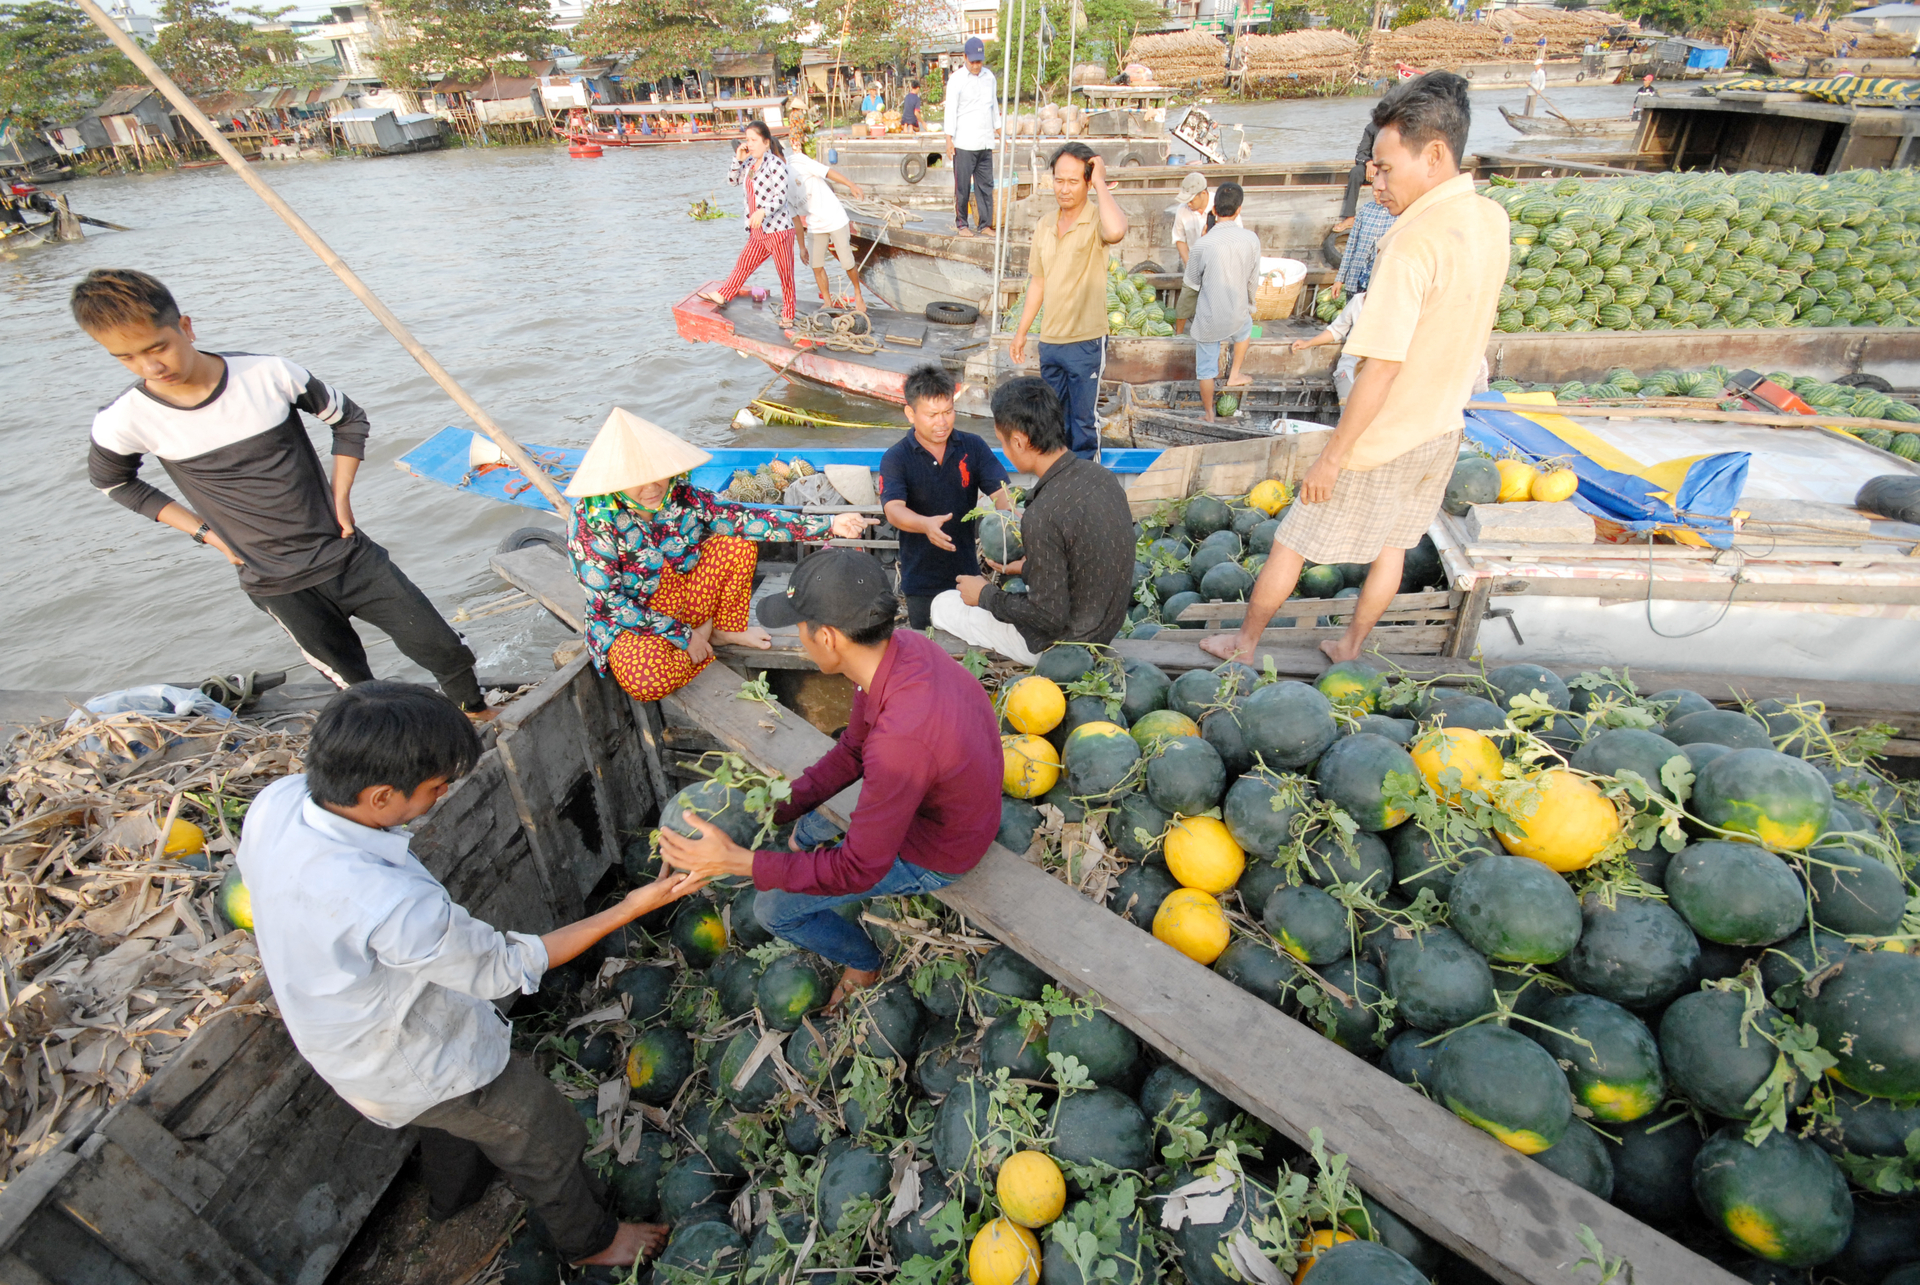 Having production linkage is necessary so that farmers can join cooperatives and cooperative groups, produce while following safe processes and gain large fruit output, aiming toward export markets. Photo: Le Hoang Vu.